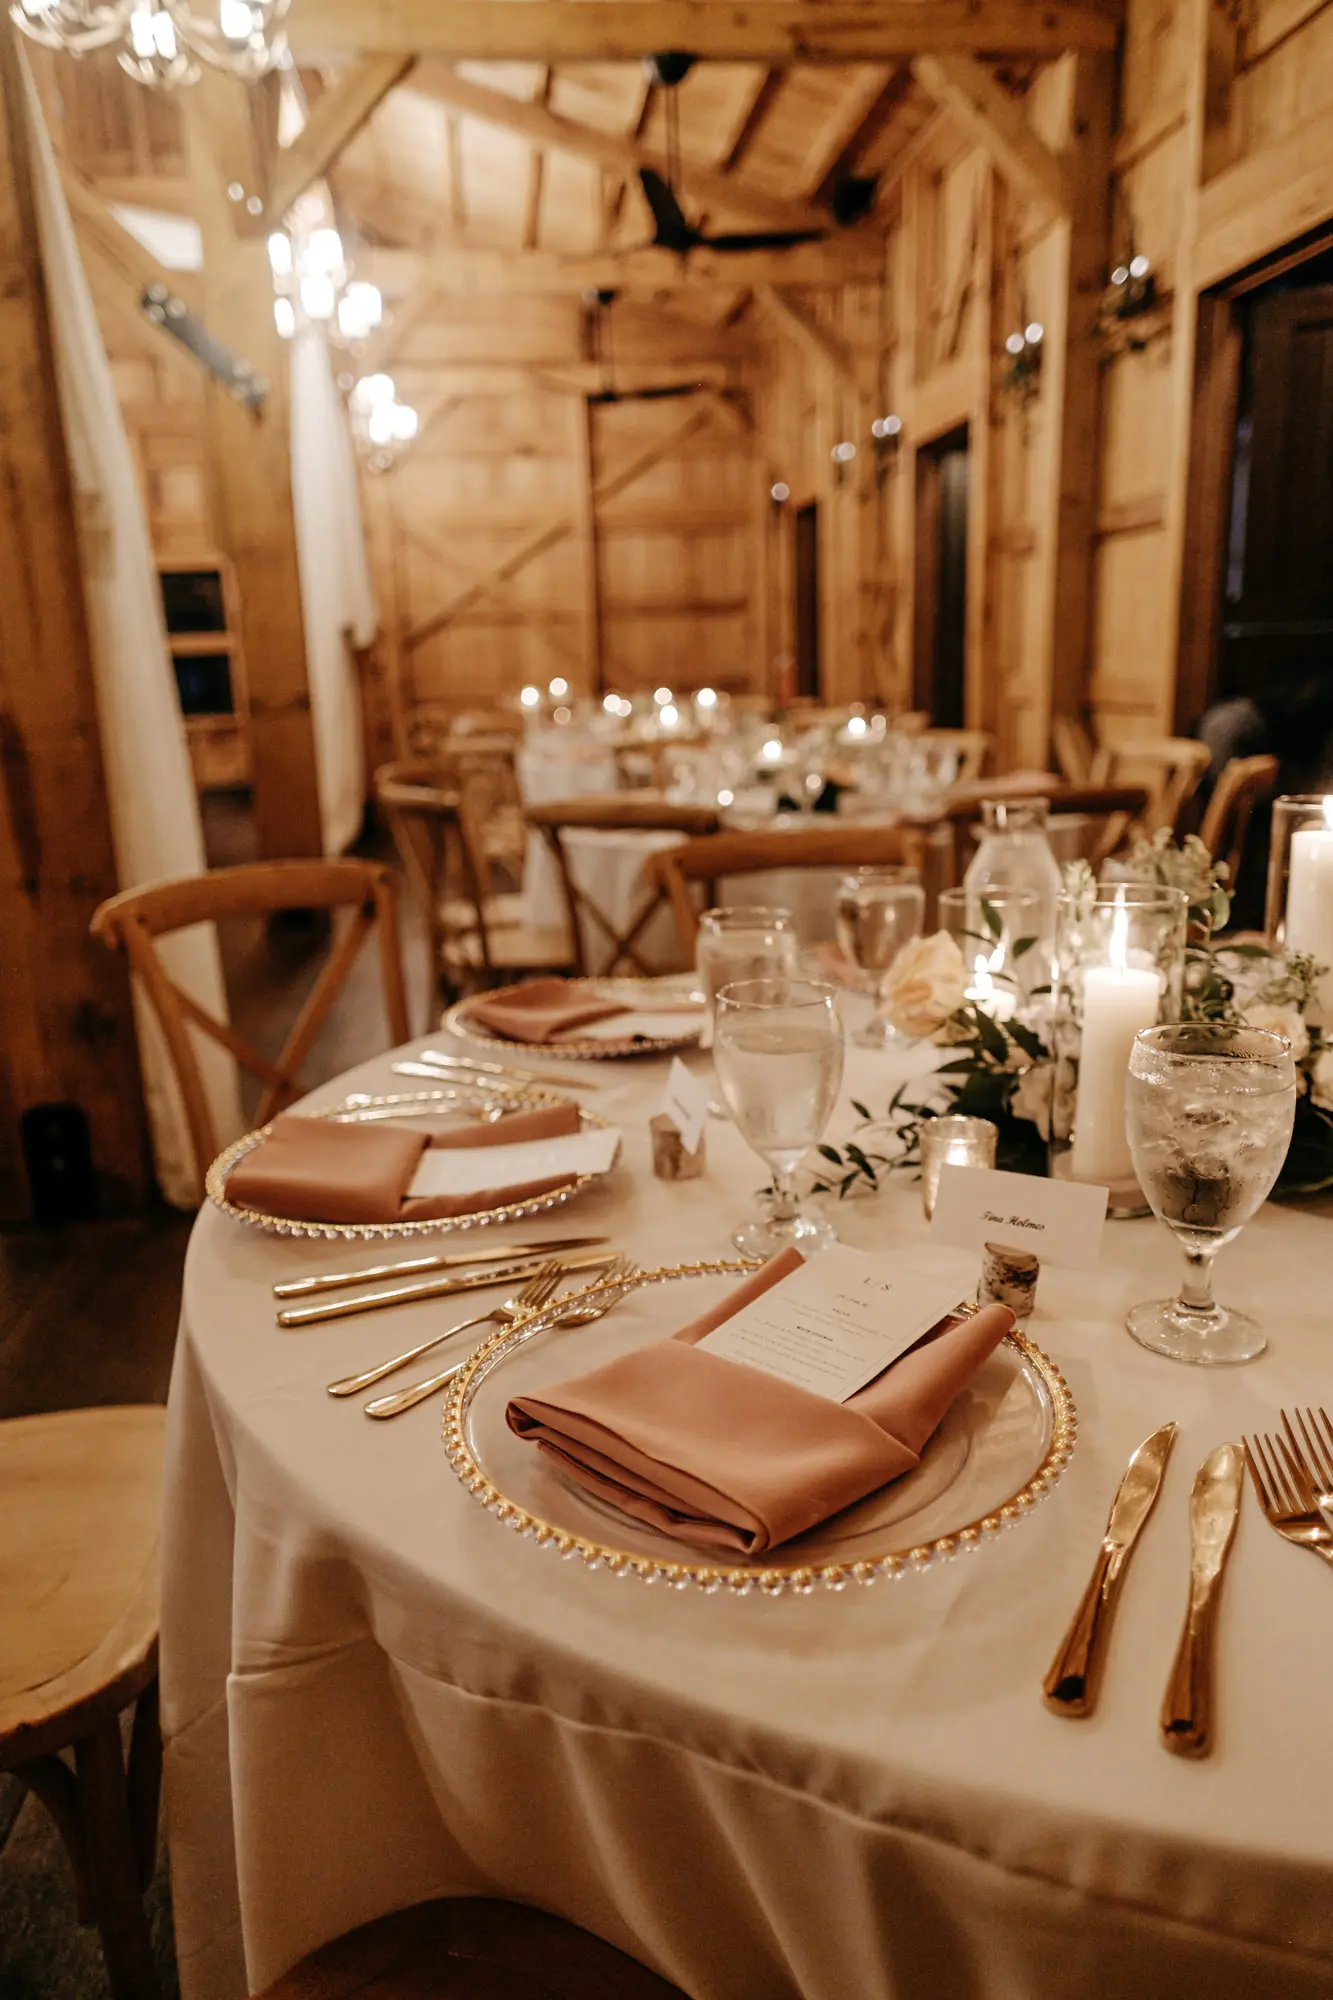 Rustic Garden Pink and Gold Barn Wedding Reception Tablescape Place Setting Decor Ideas